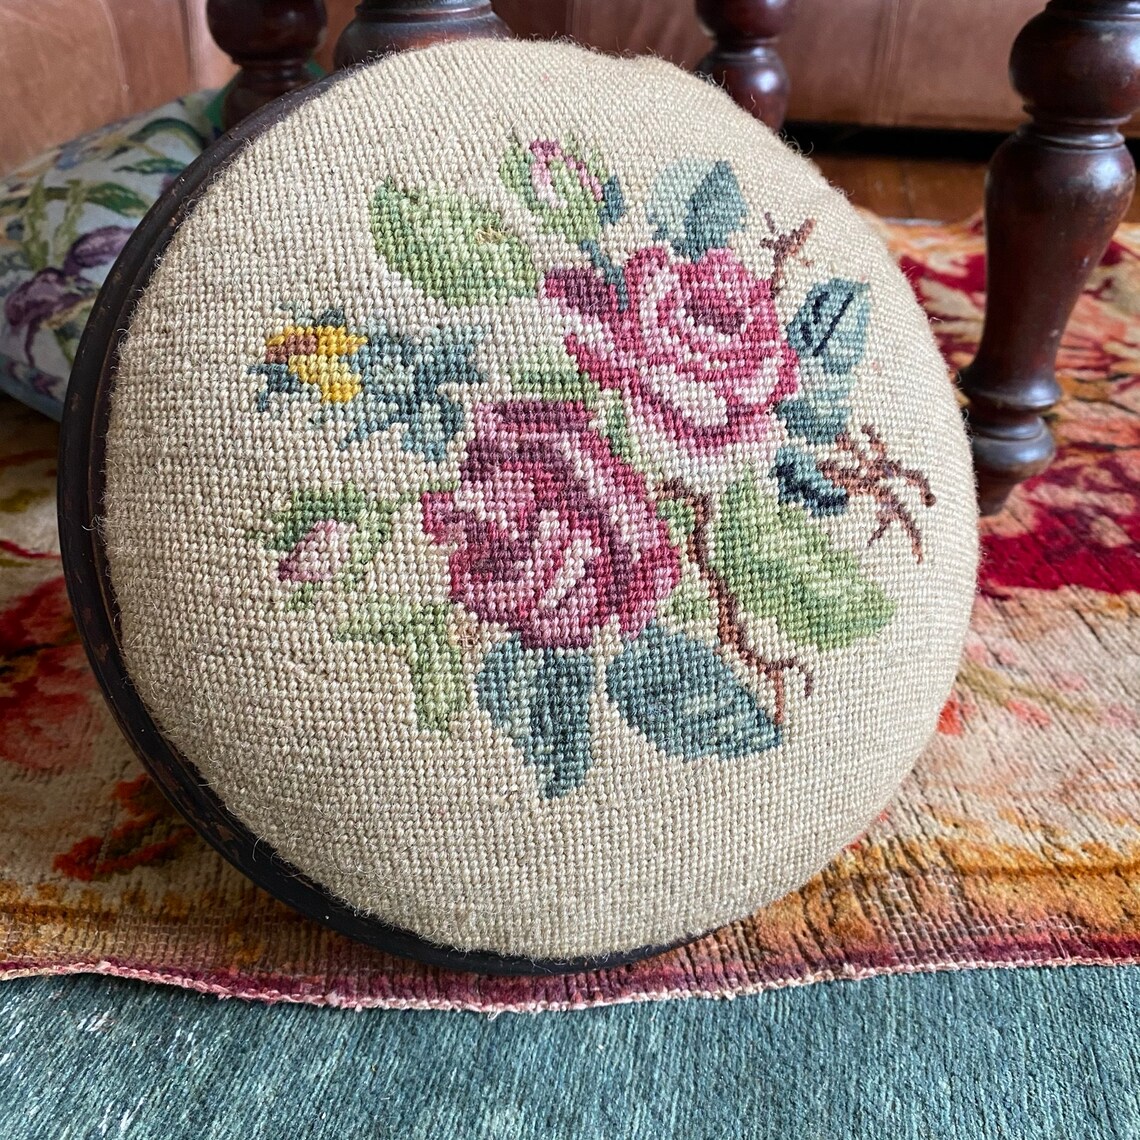 Vintage Floral Needlepoint Foot Stool Age and Wear | Etsy